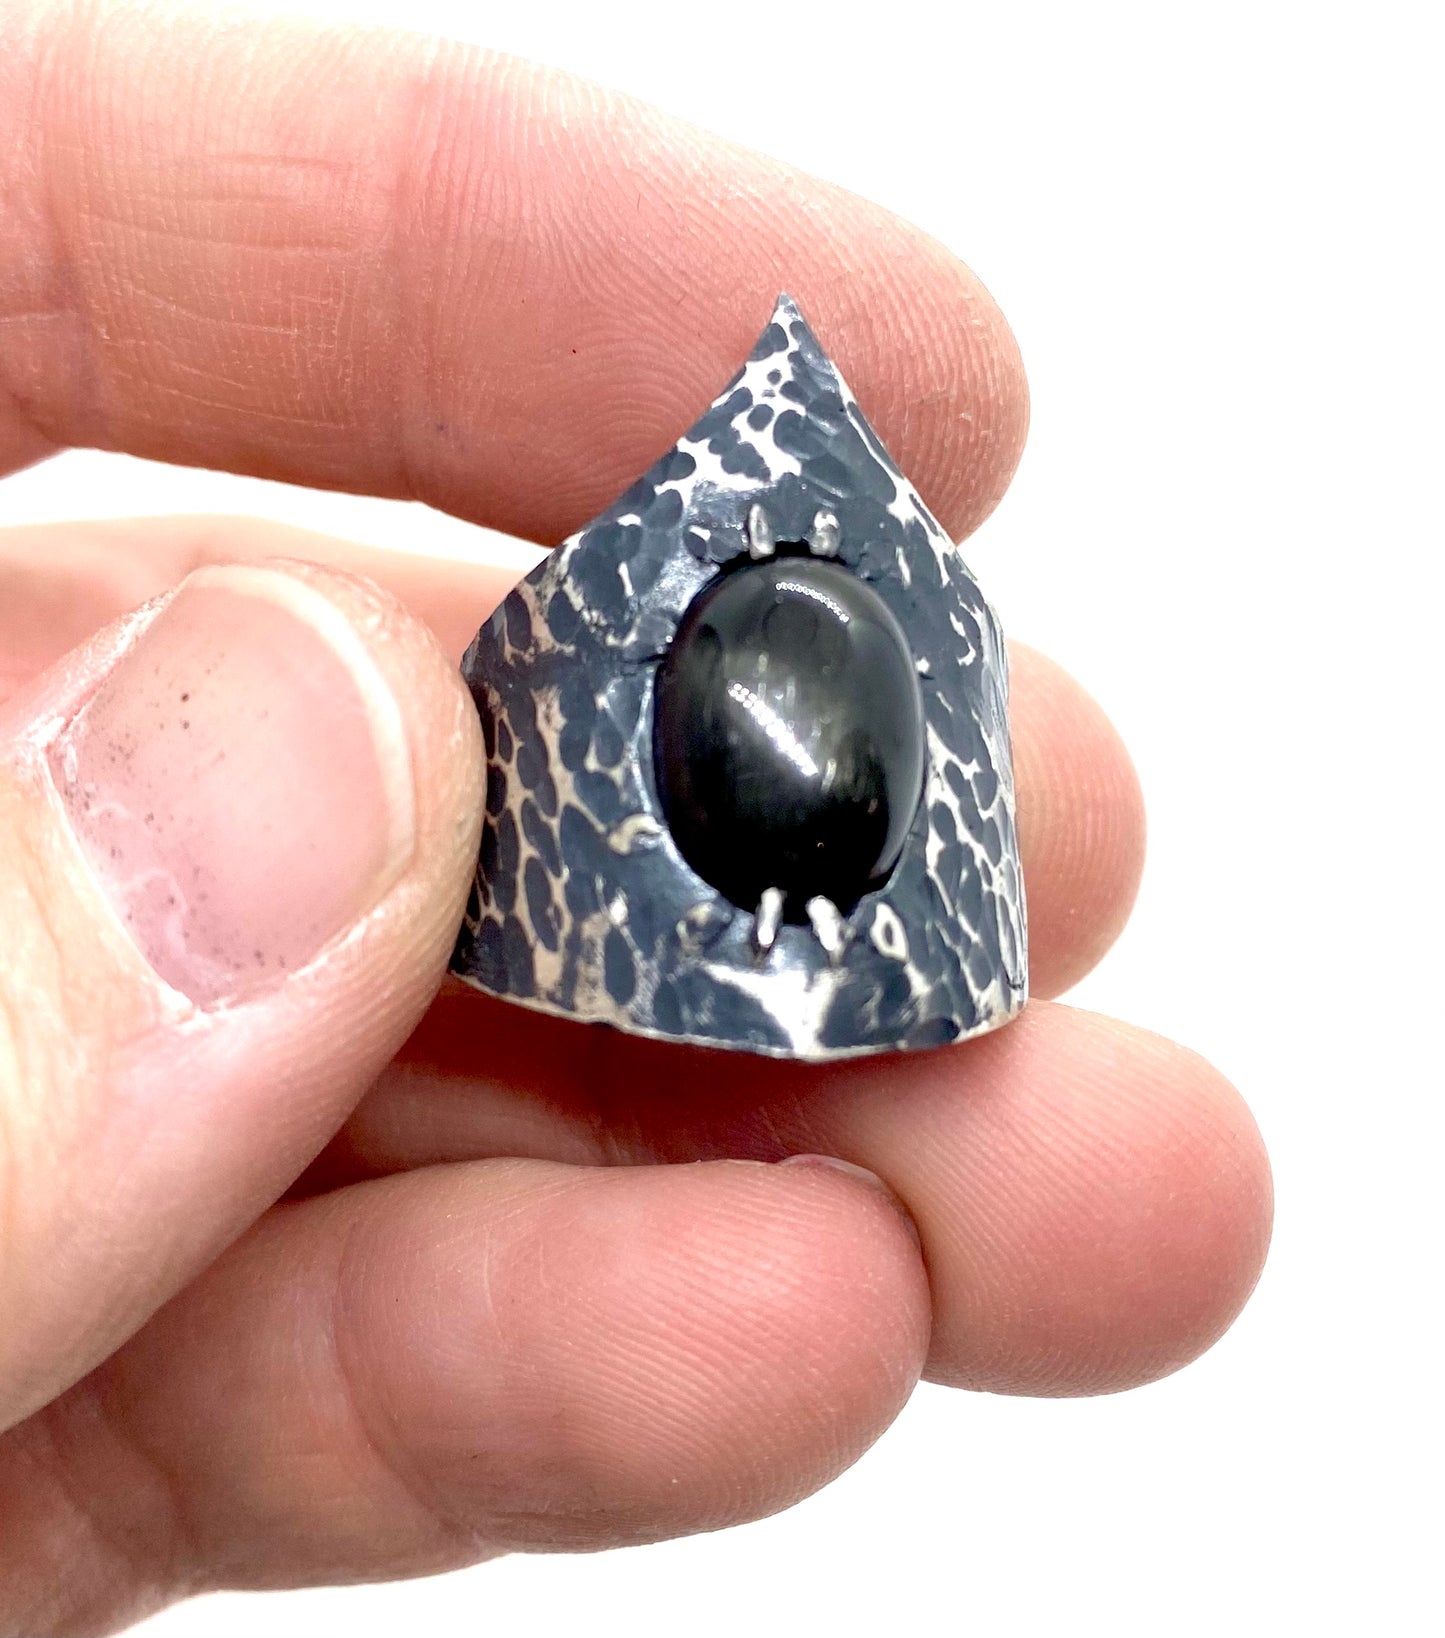 Thornguard’s Ring Black Diopside Star in Sterling silver